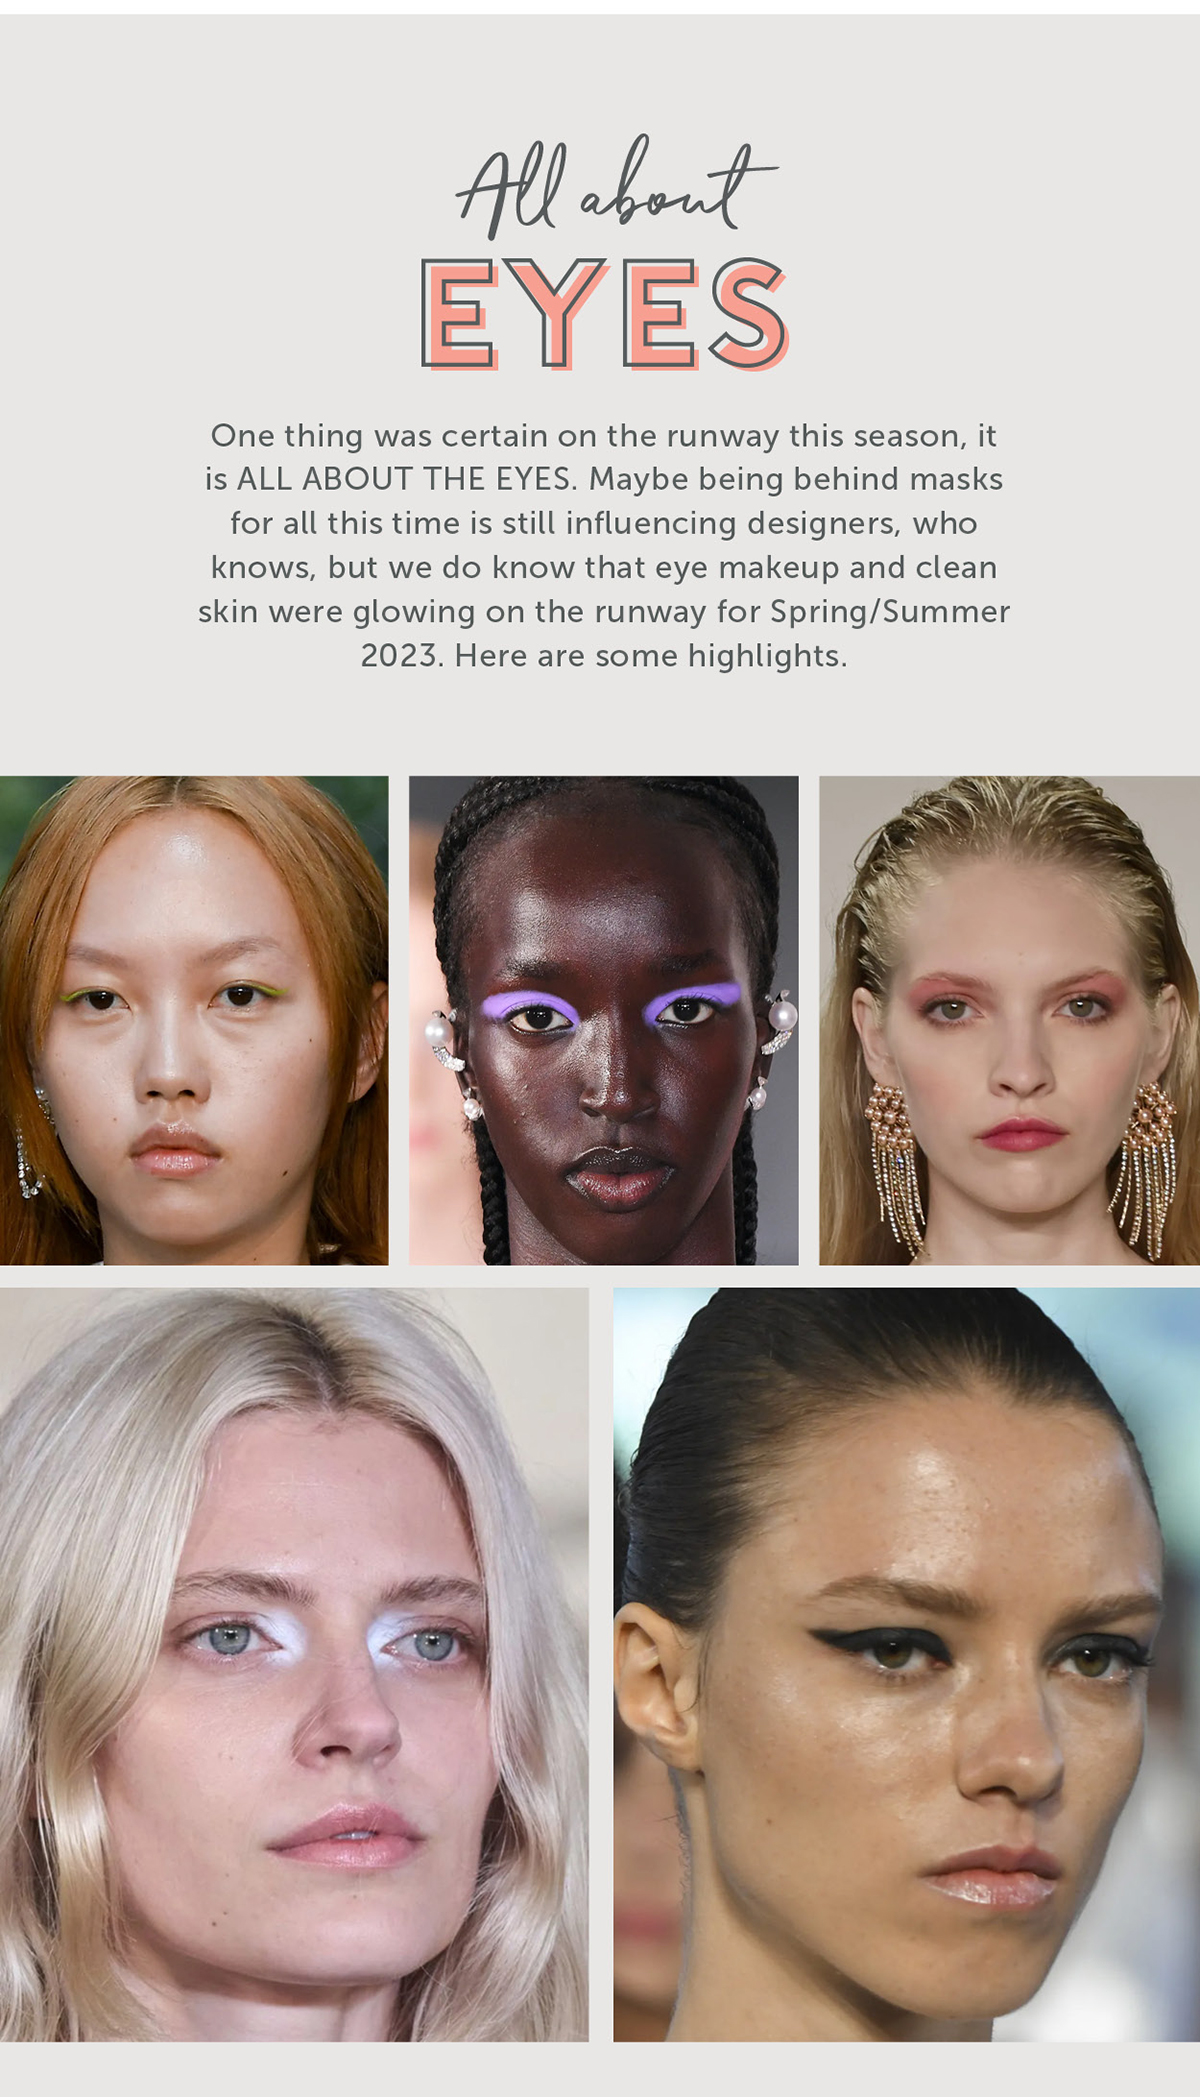 All About Eyes One thing was certain on the runway this season, it is ALL ABOUT THE EYES. Maybe being behind masks for all this time is still influencing designers, who knows, but we do know that eye makeup and clean skin were glowing on the runway for Spring/Summer 2023. Here are some highlights.